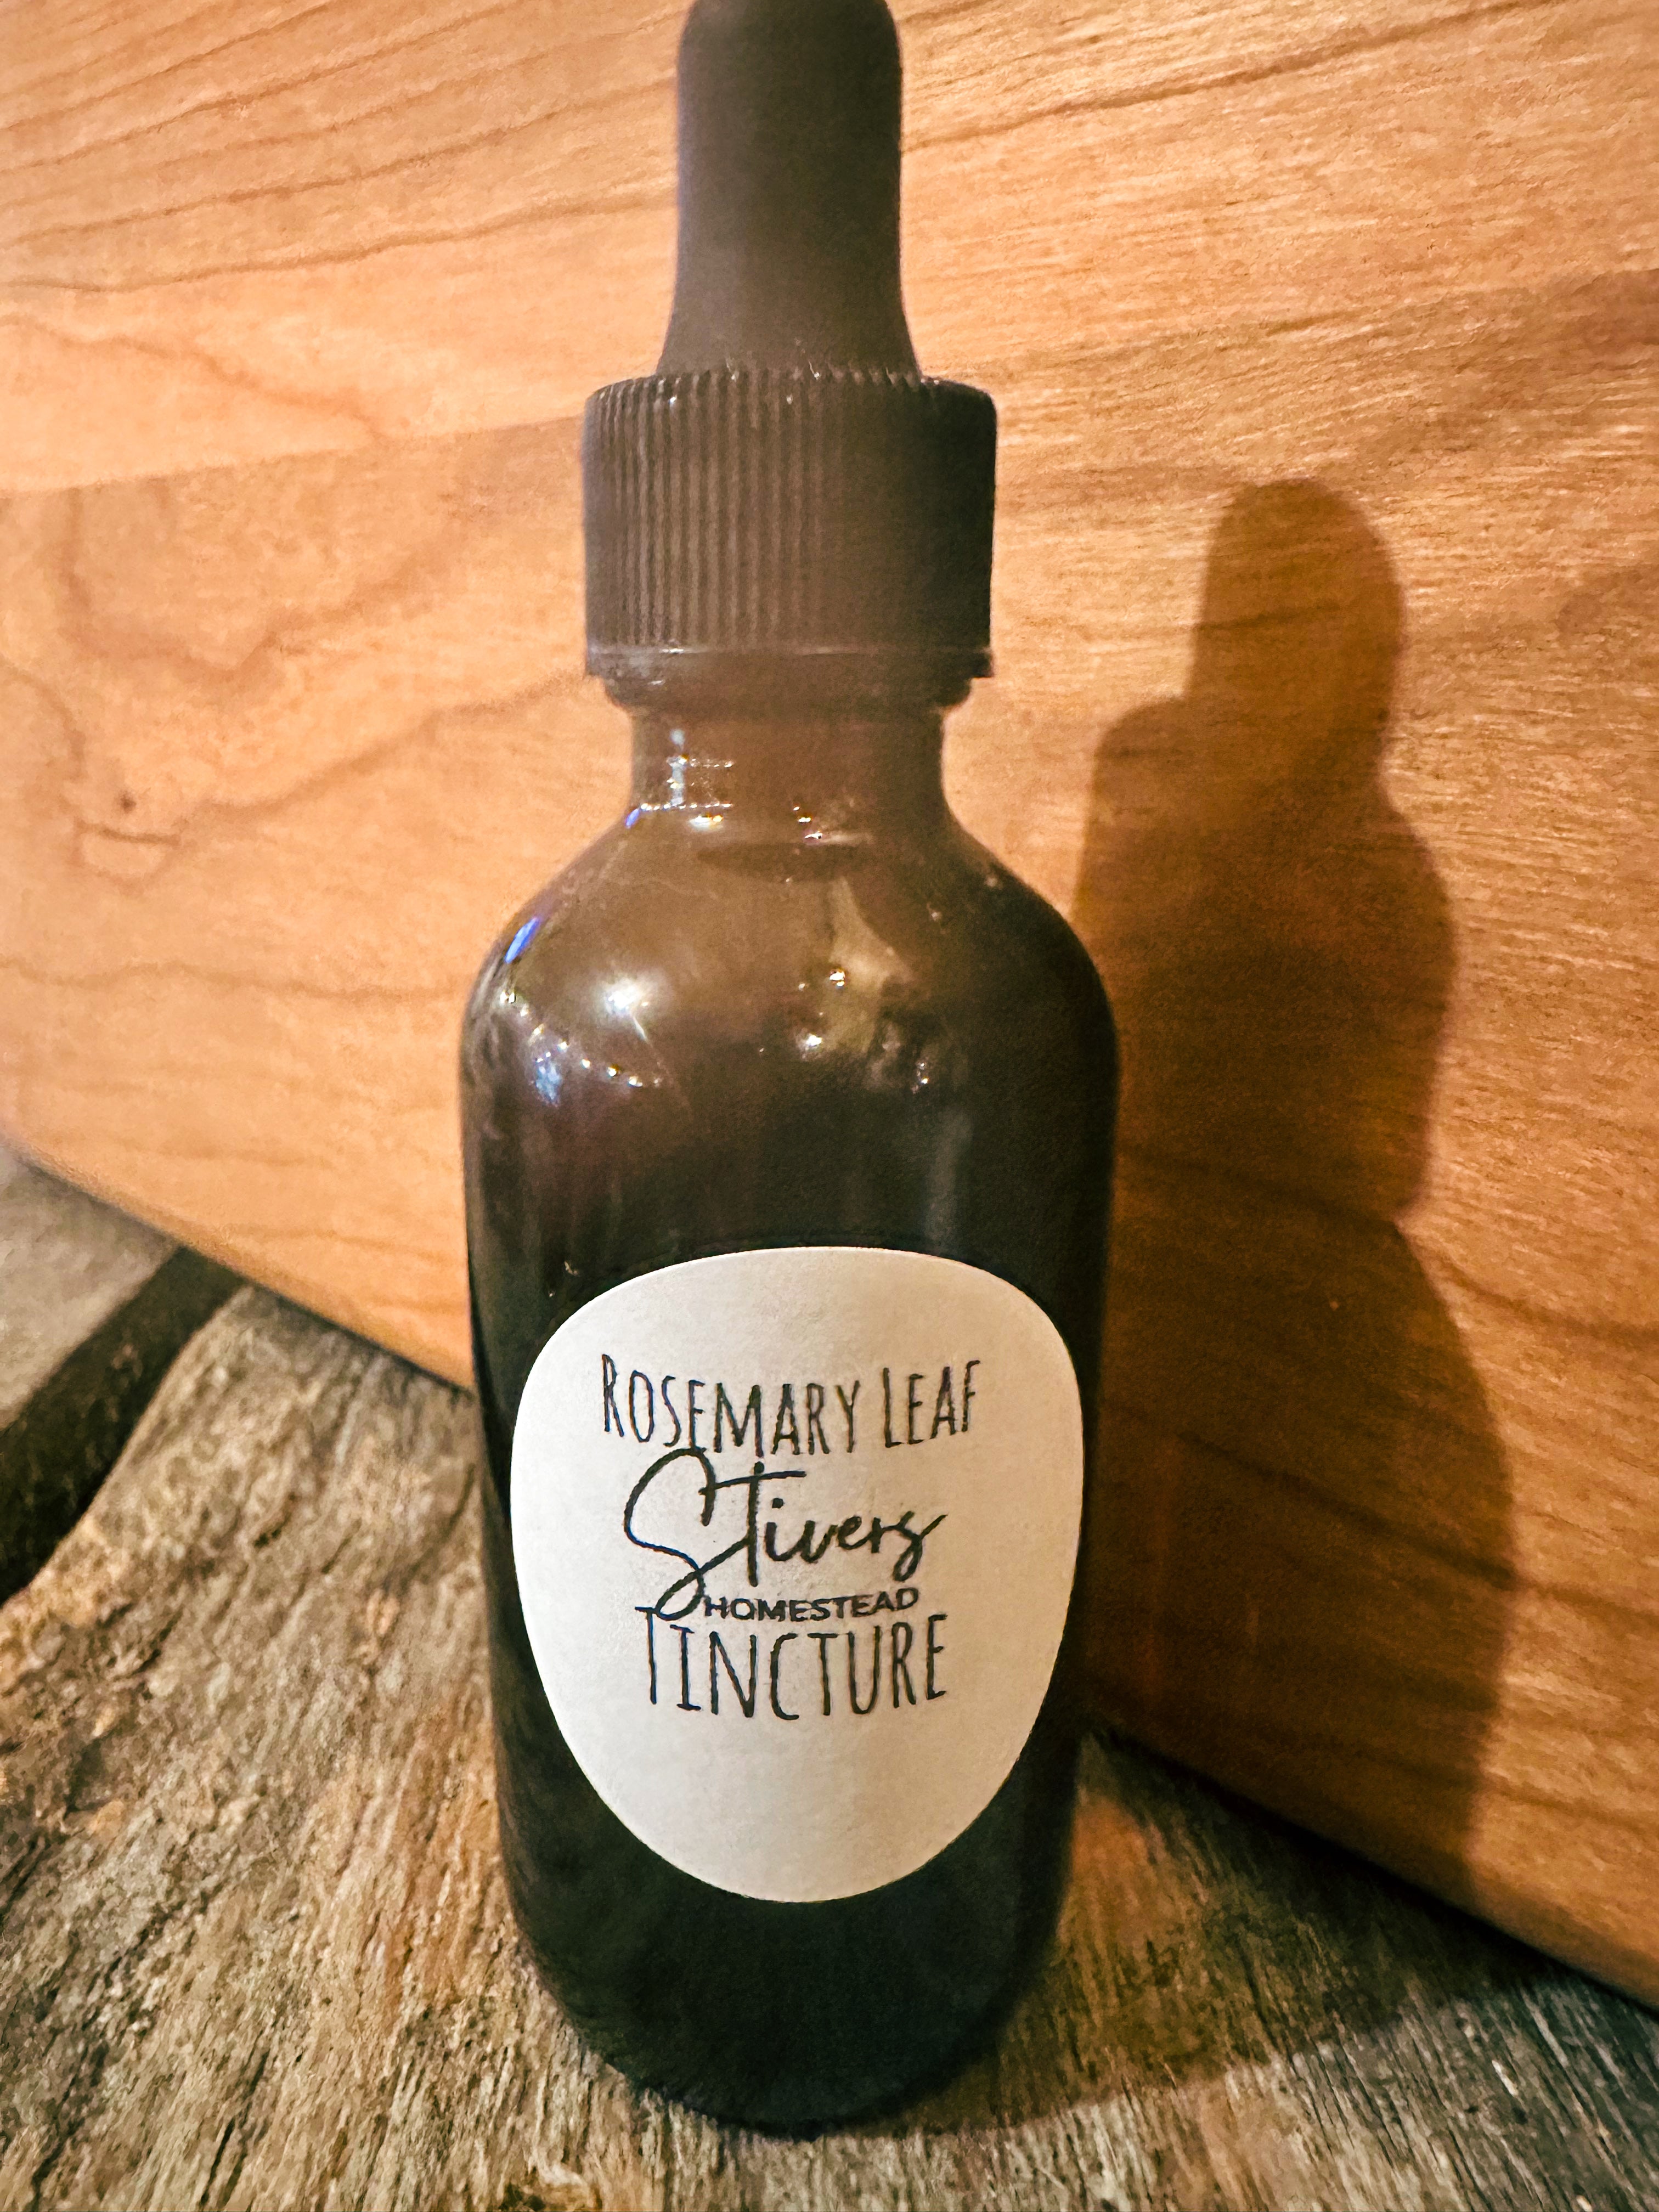 Rosemary Leaf Tincture (hair growth, memory improvement)